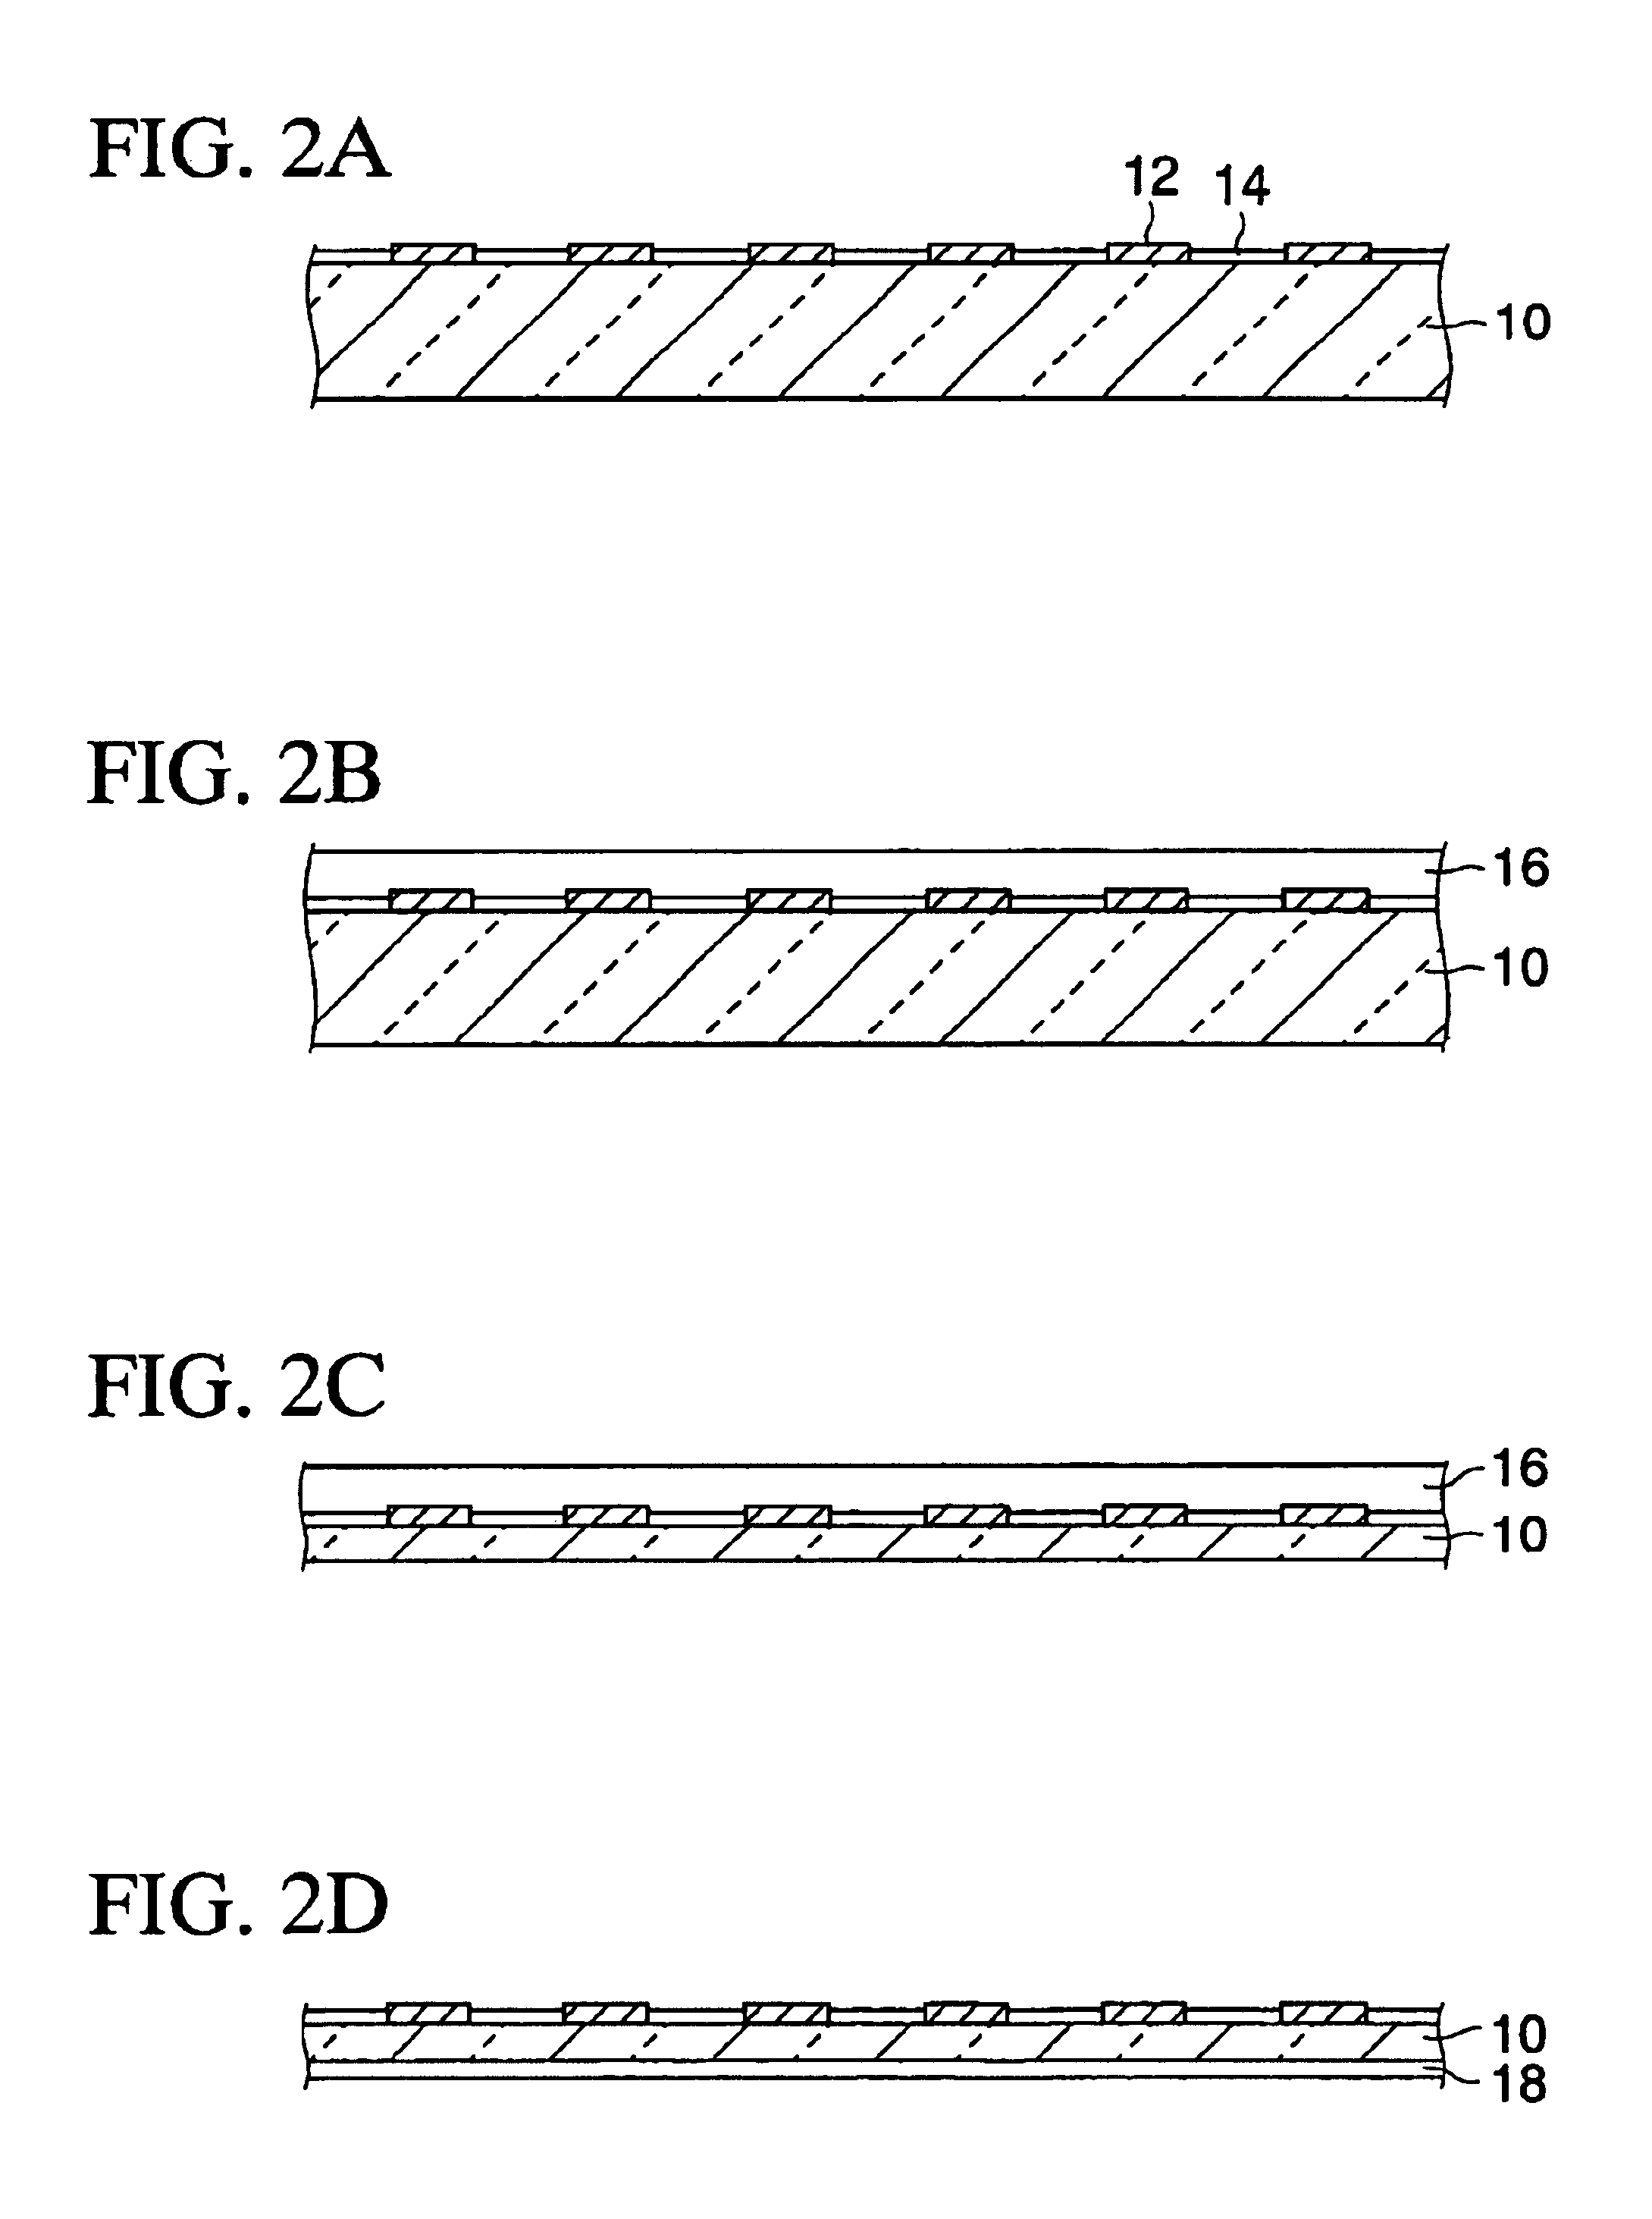 Electronic parts packaging structure and method of manufacturing the same